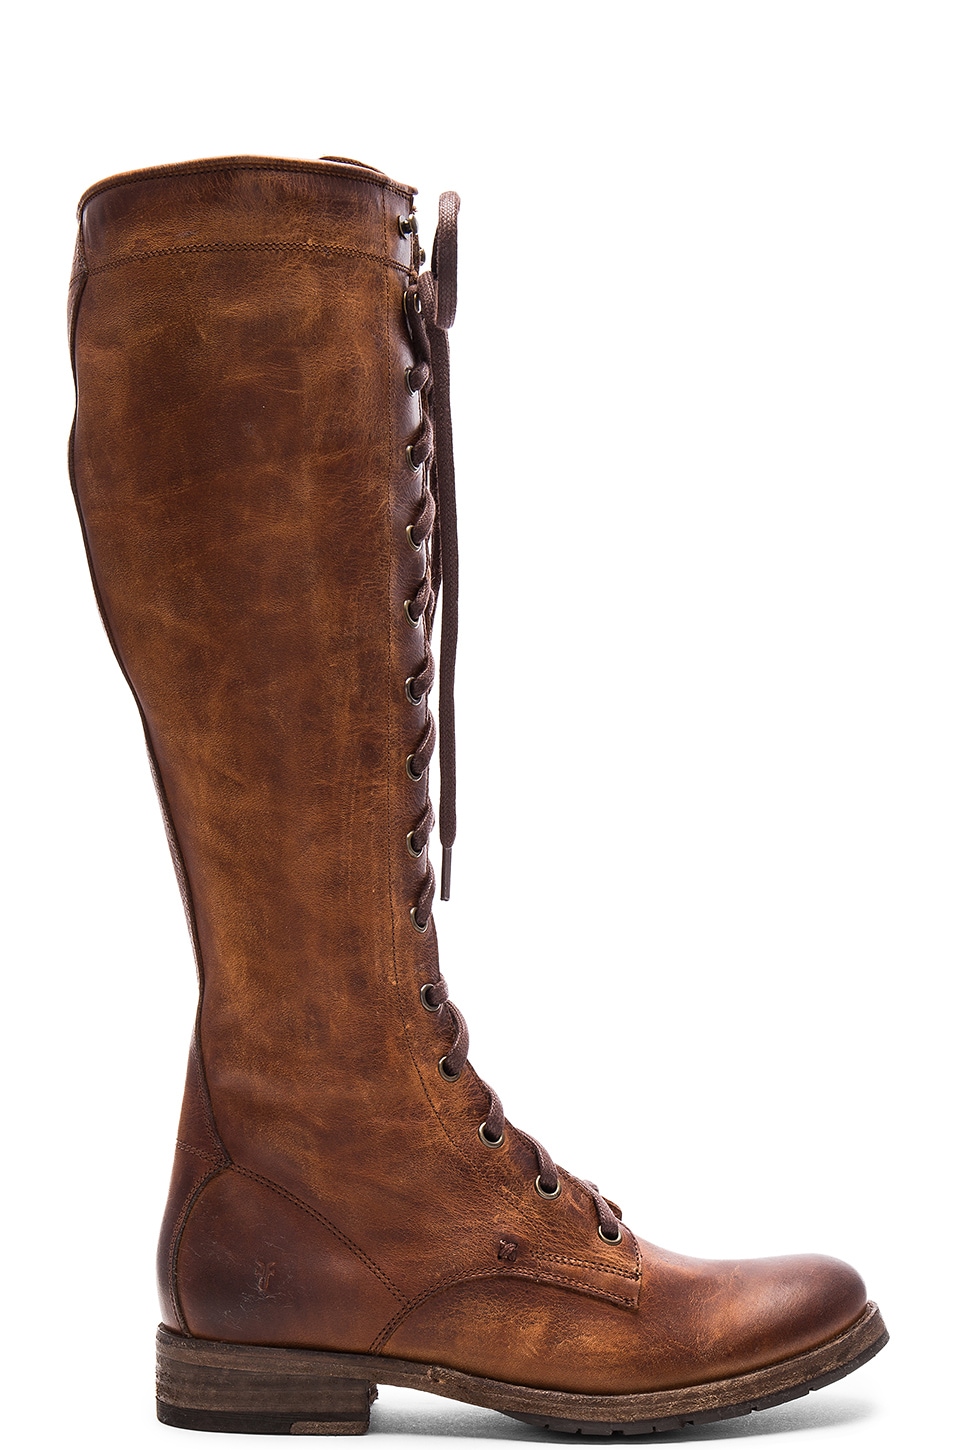 Frye Melissa Tall Lace Boot in Cognac 